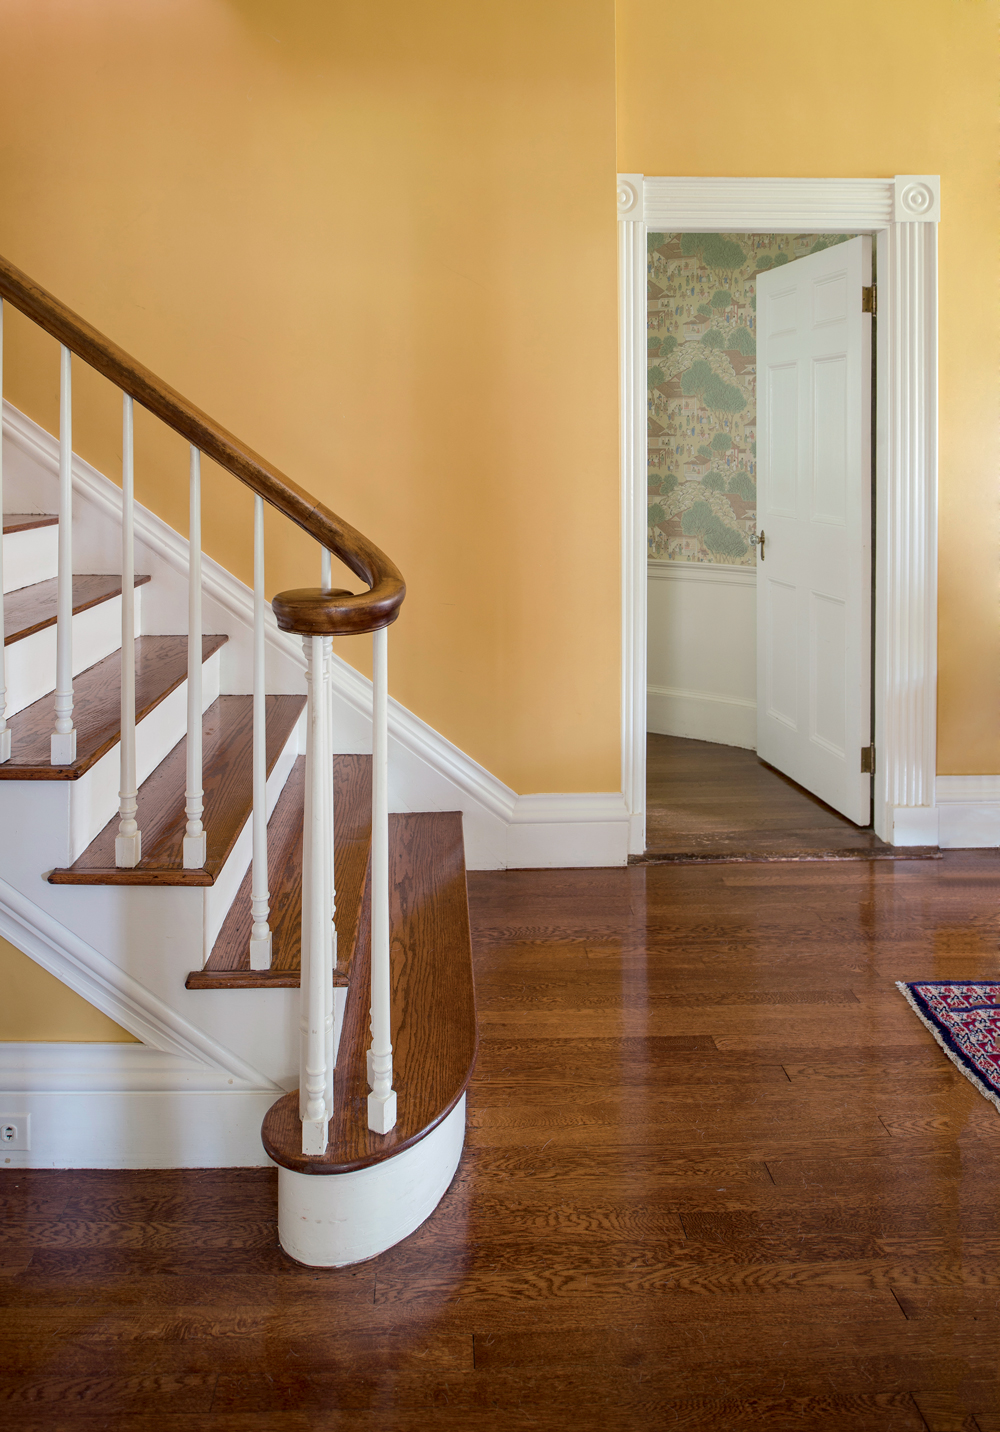 A hallway’s gleaming flooring and graceful staircase.